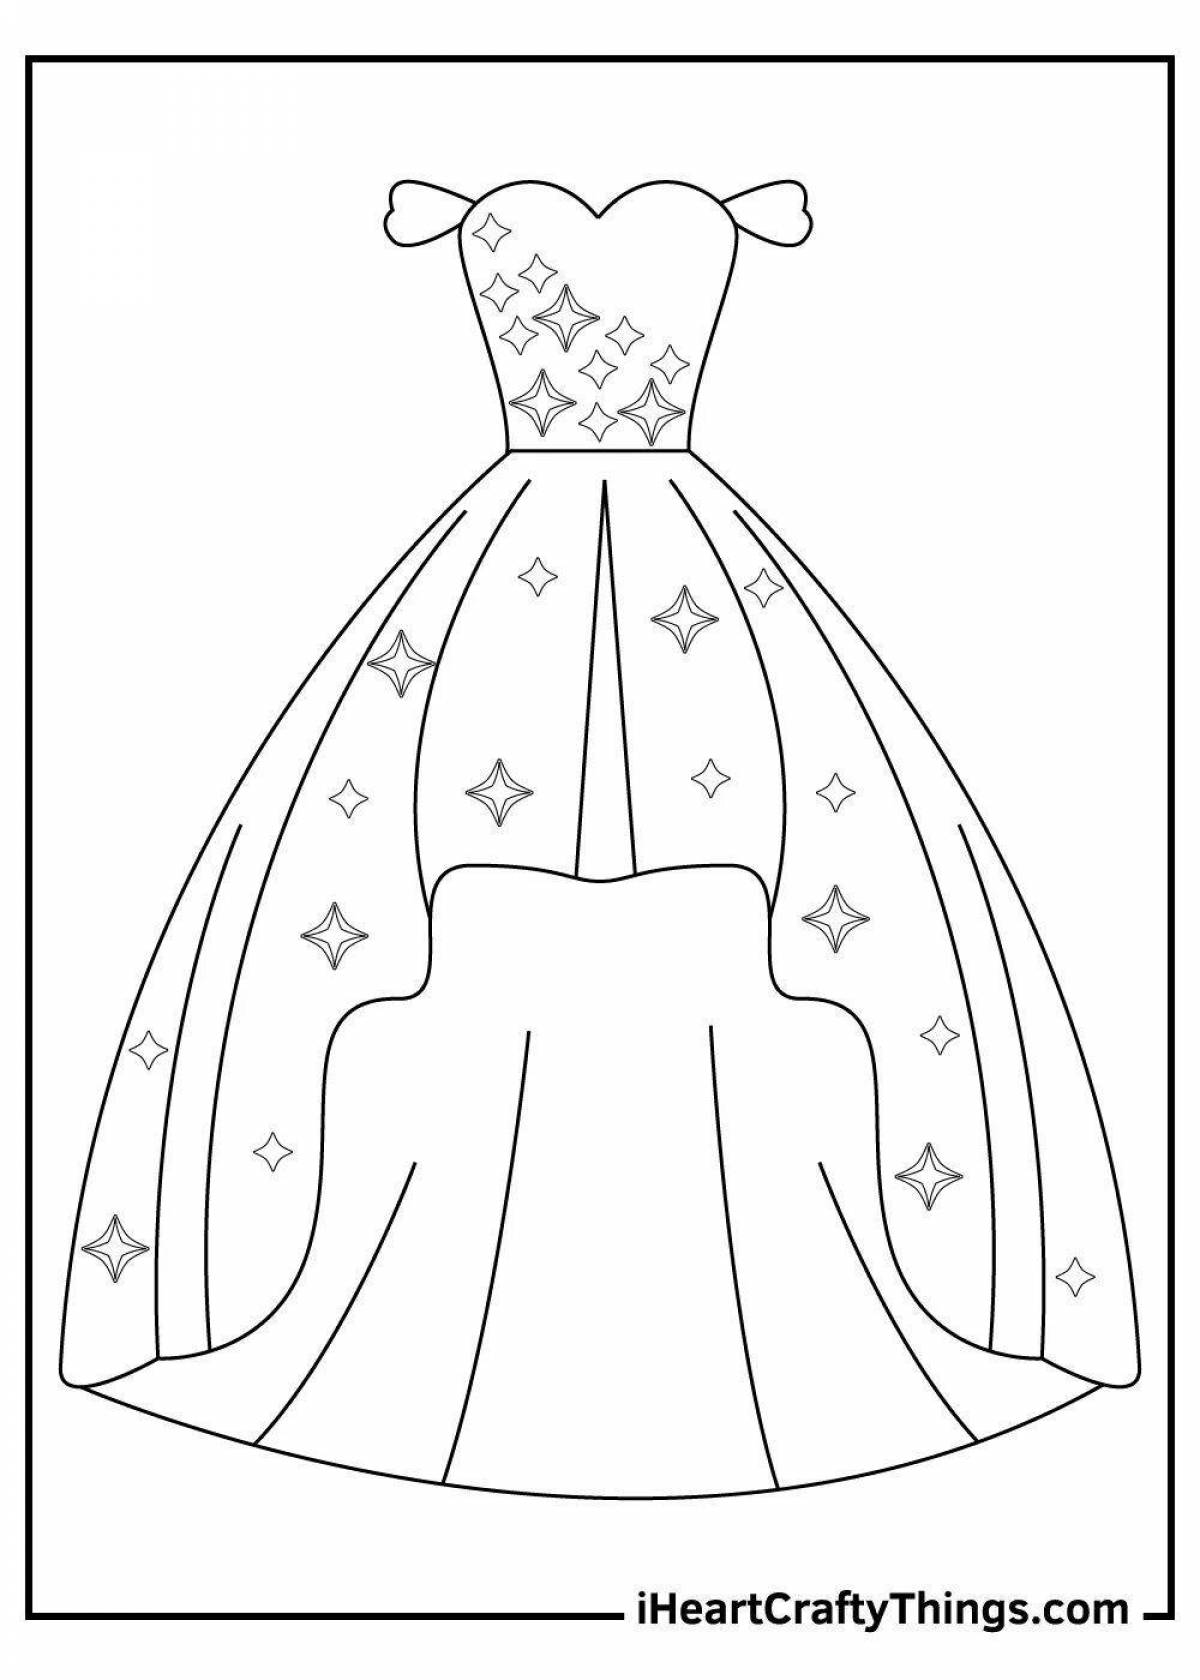 Coloring page cute dress for children 2-3 years old